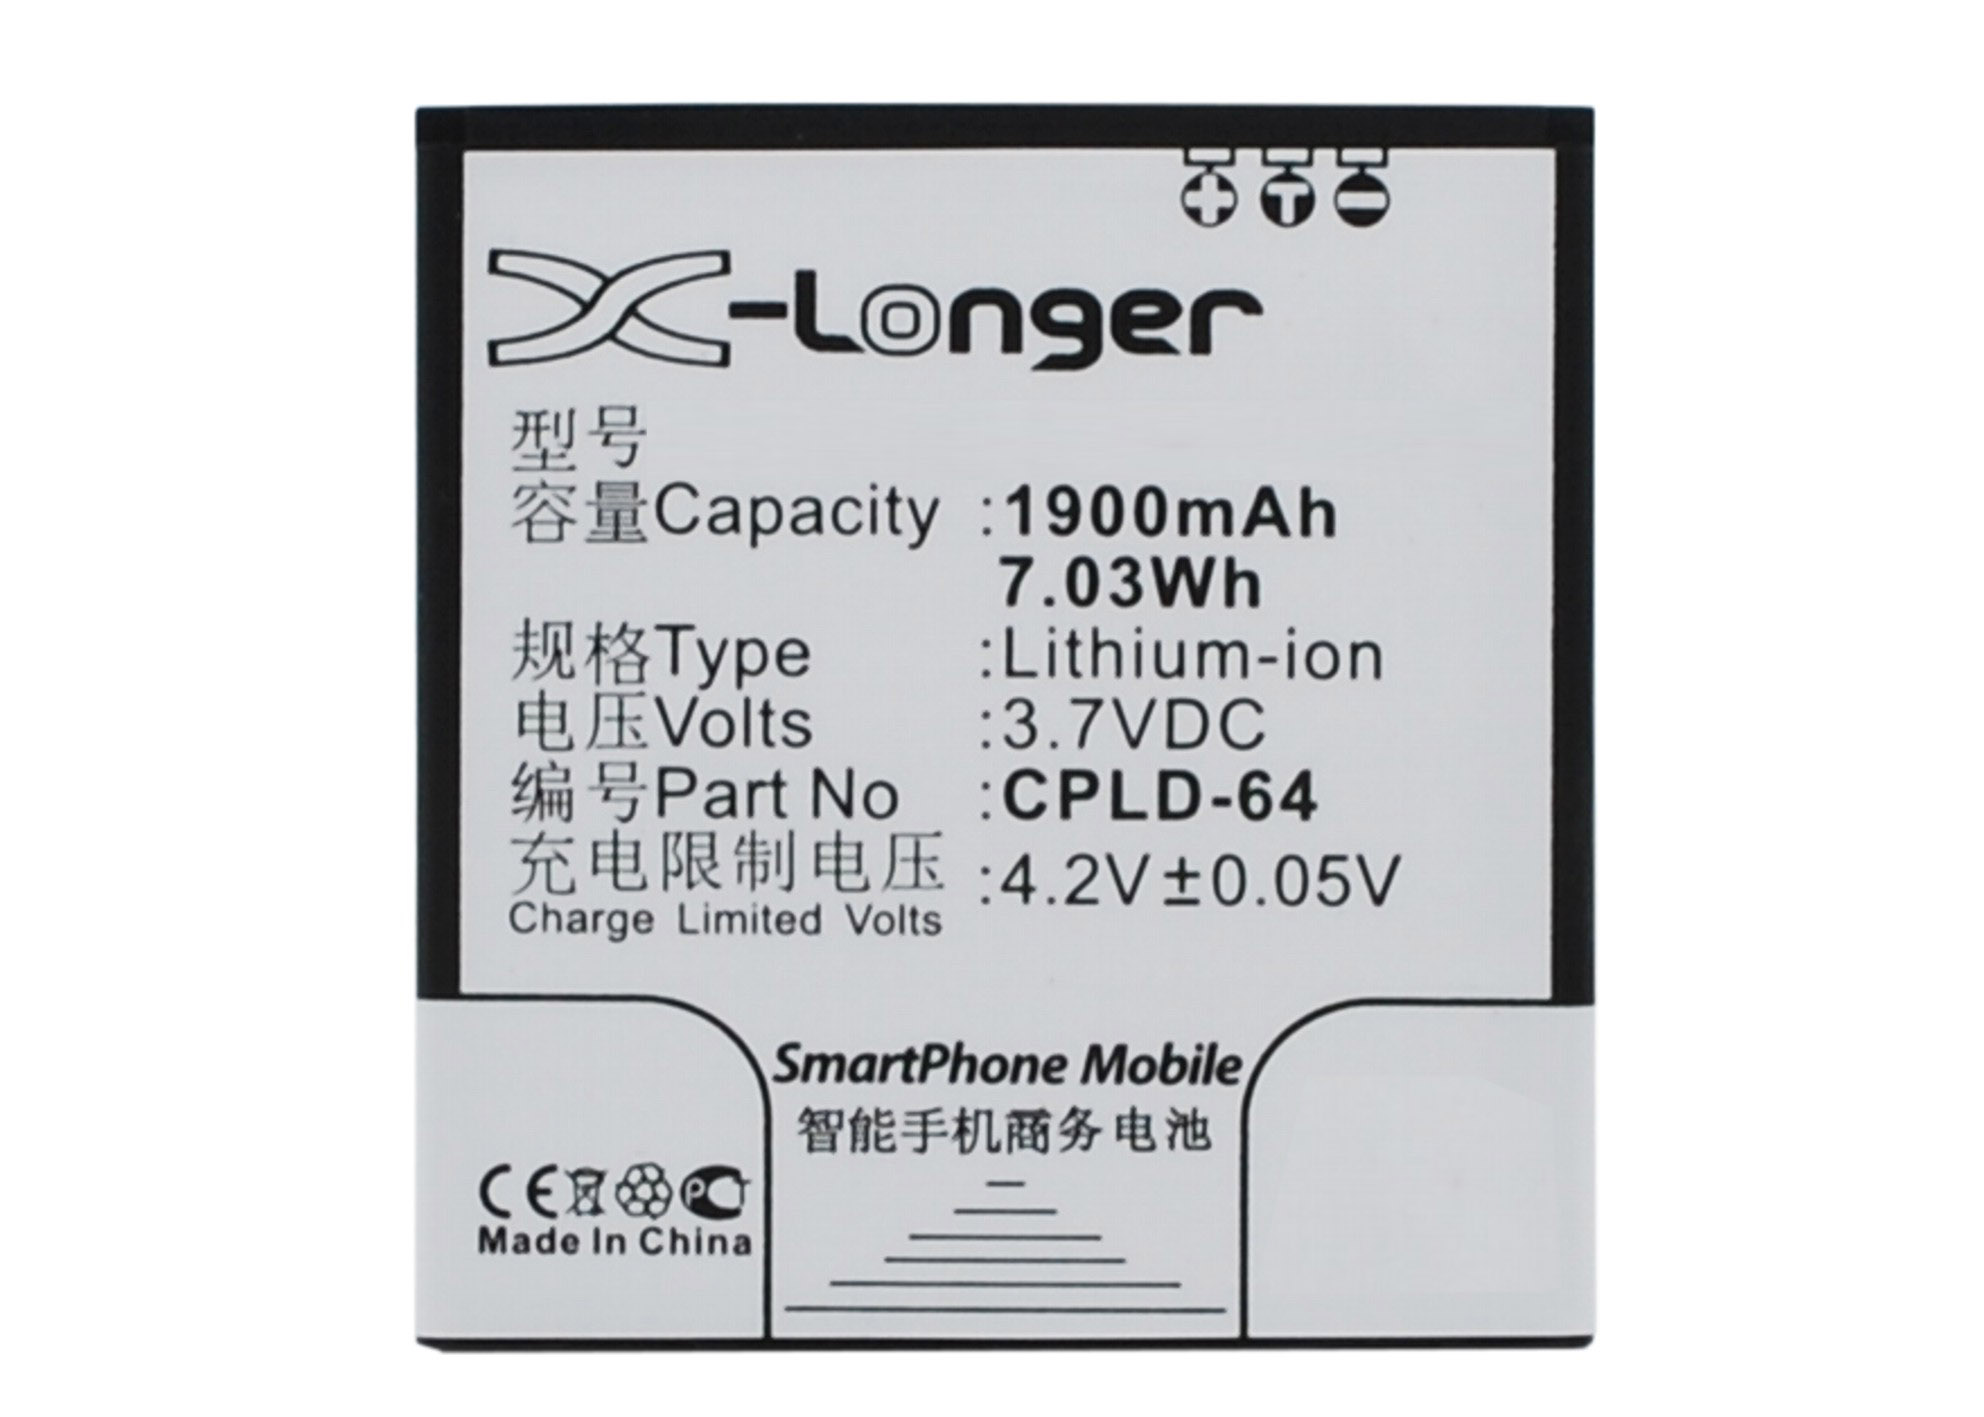 Synergy Digital Battery Compatible With Coolpad CPLD-64 Cellphone Battery - (Li-Ion, 3.7V, 1900 mAh / 7.03Wh)